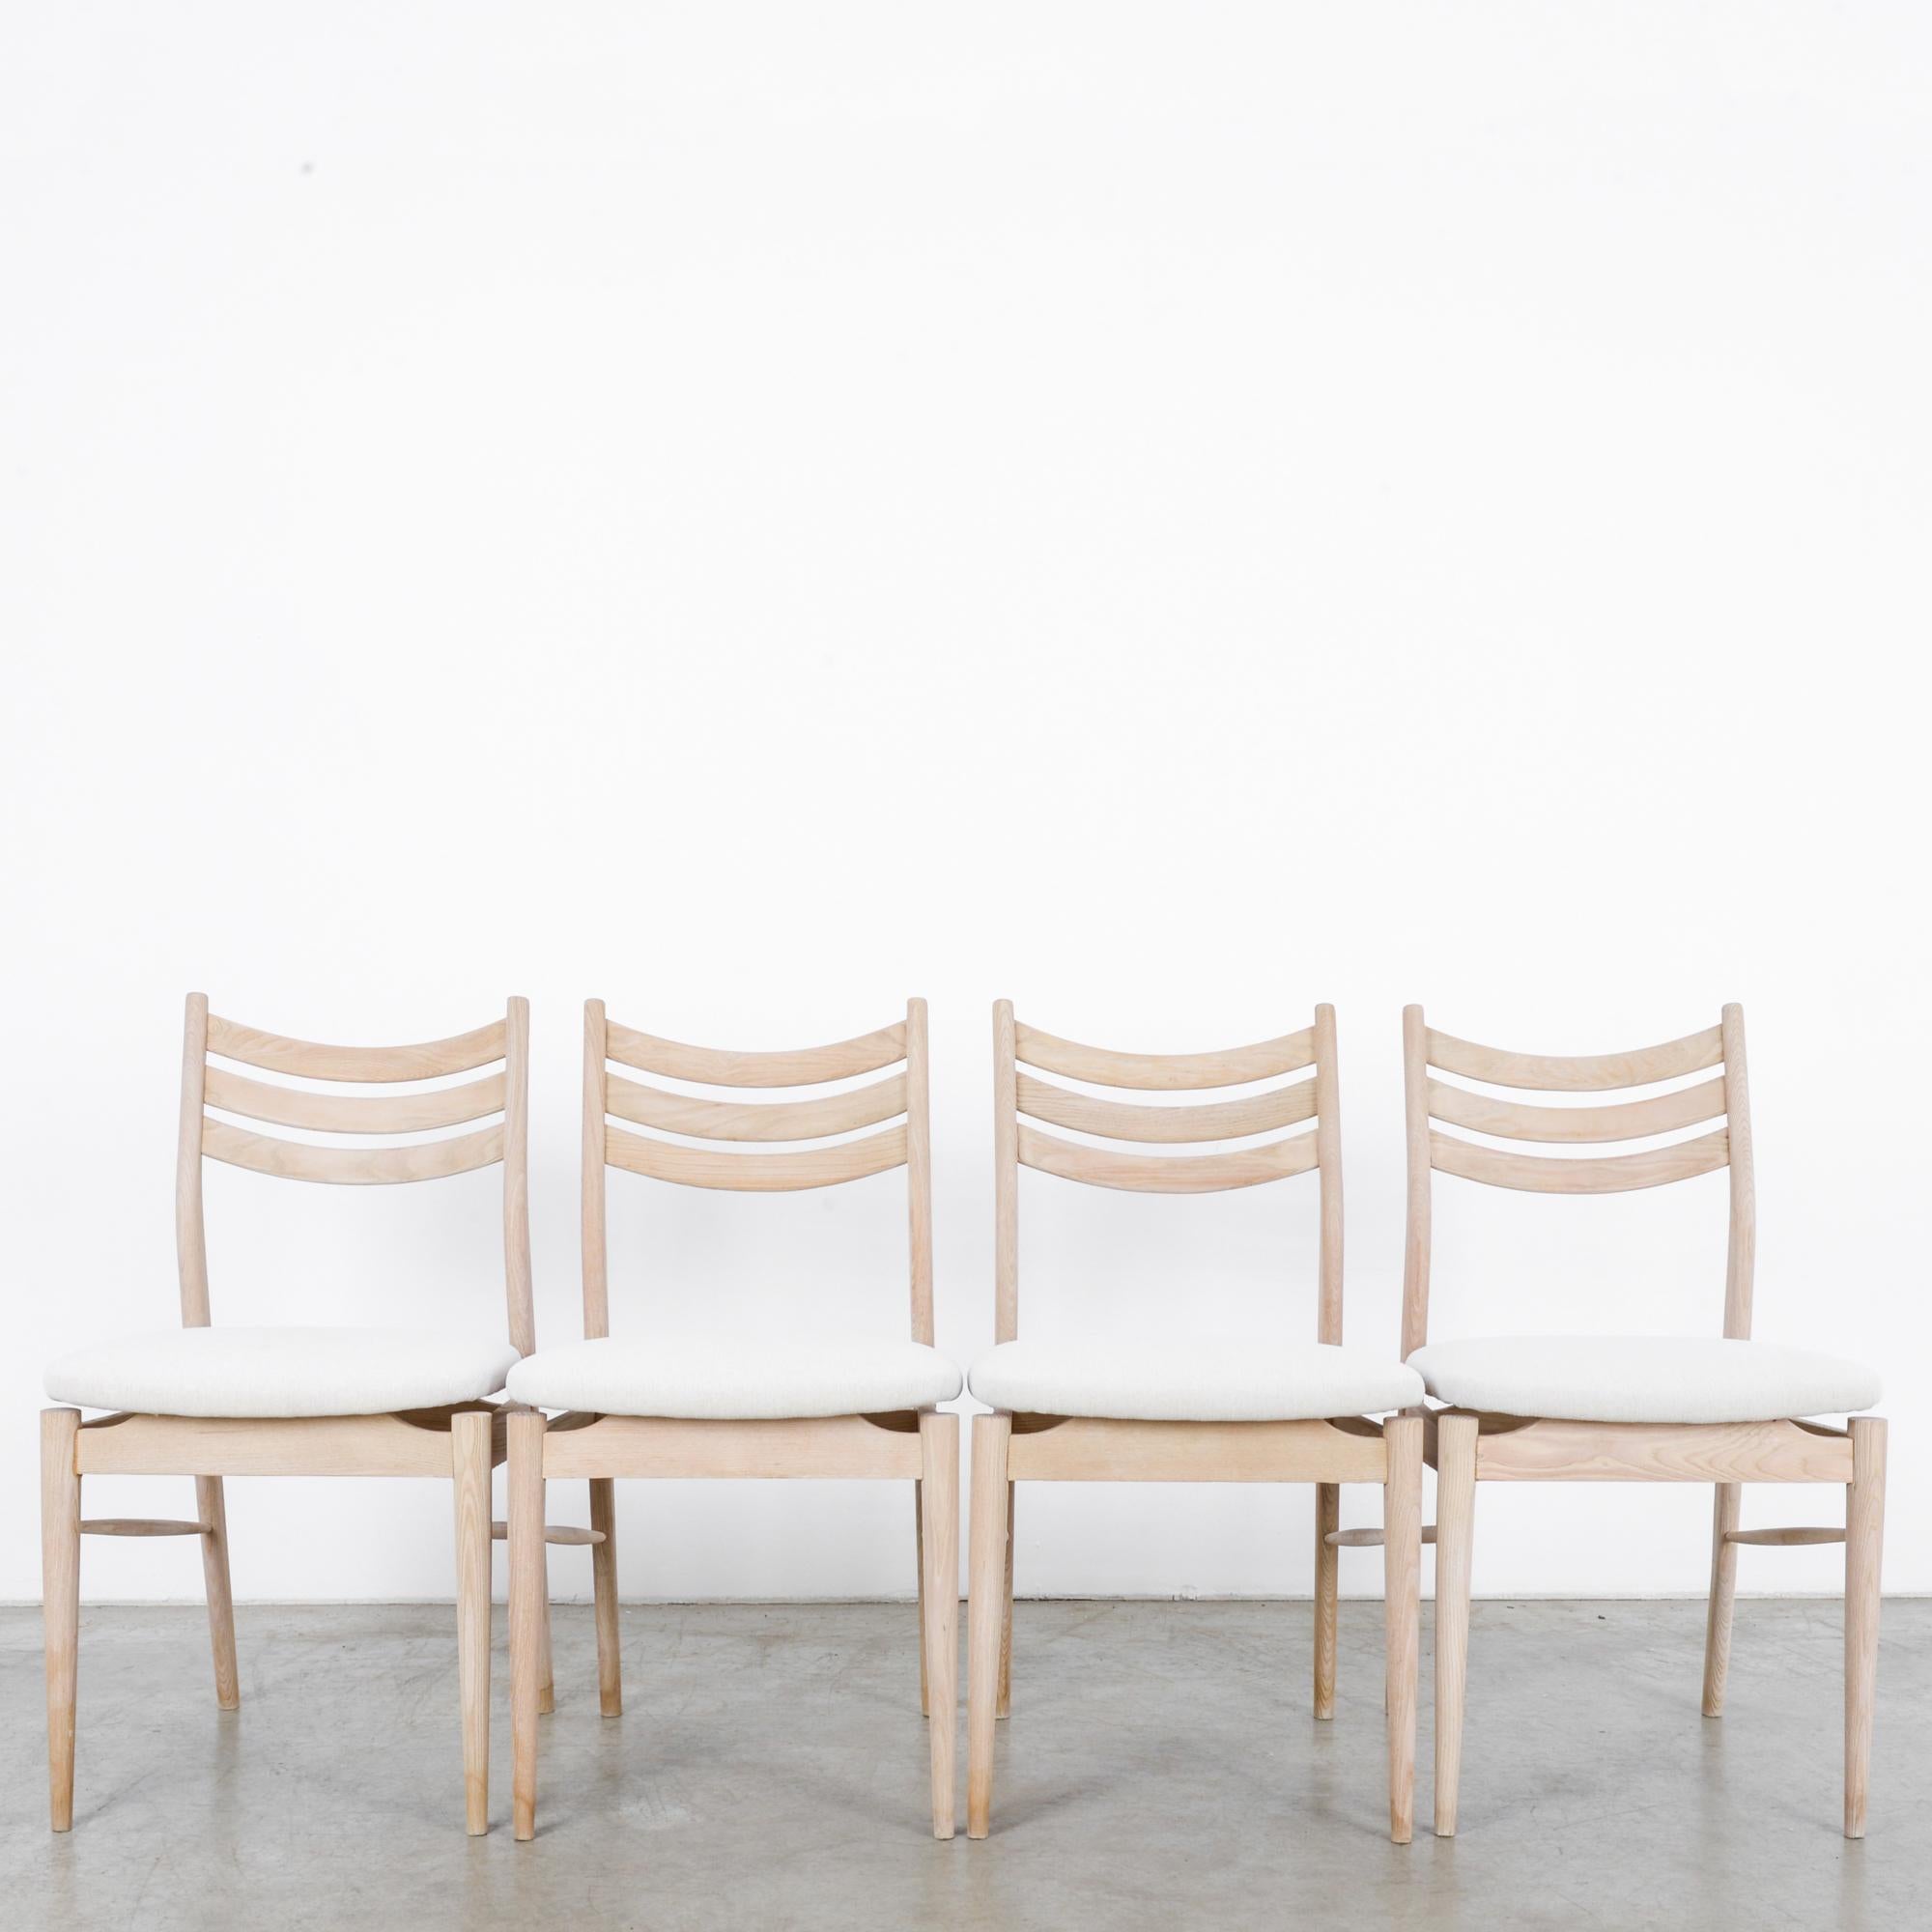 A set of four French wooden dining chairs, circa 1960s. Graceful legs connected by simple stretchers support a swooping apron holding aloft seats that appear as plump clouds, fog hugging the canopy of an old growth forest. With dramatic swooping